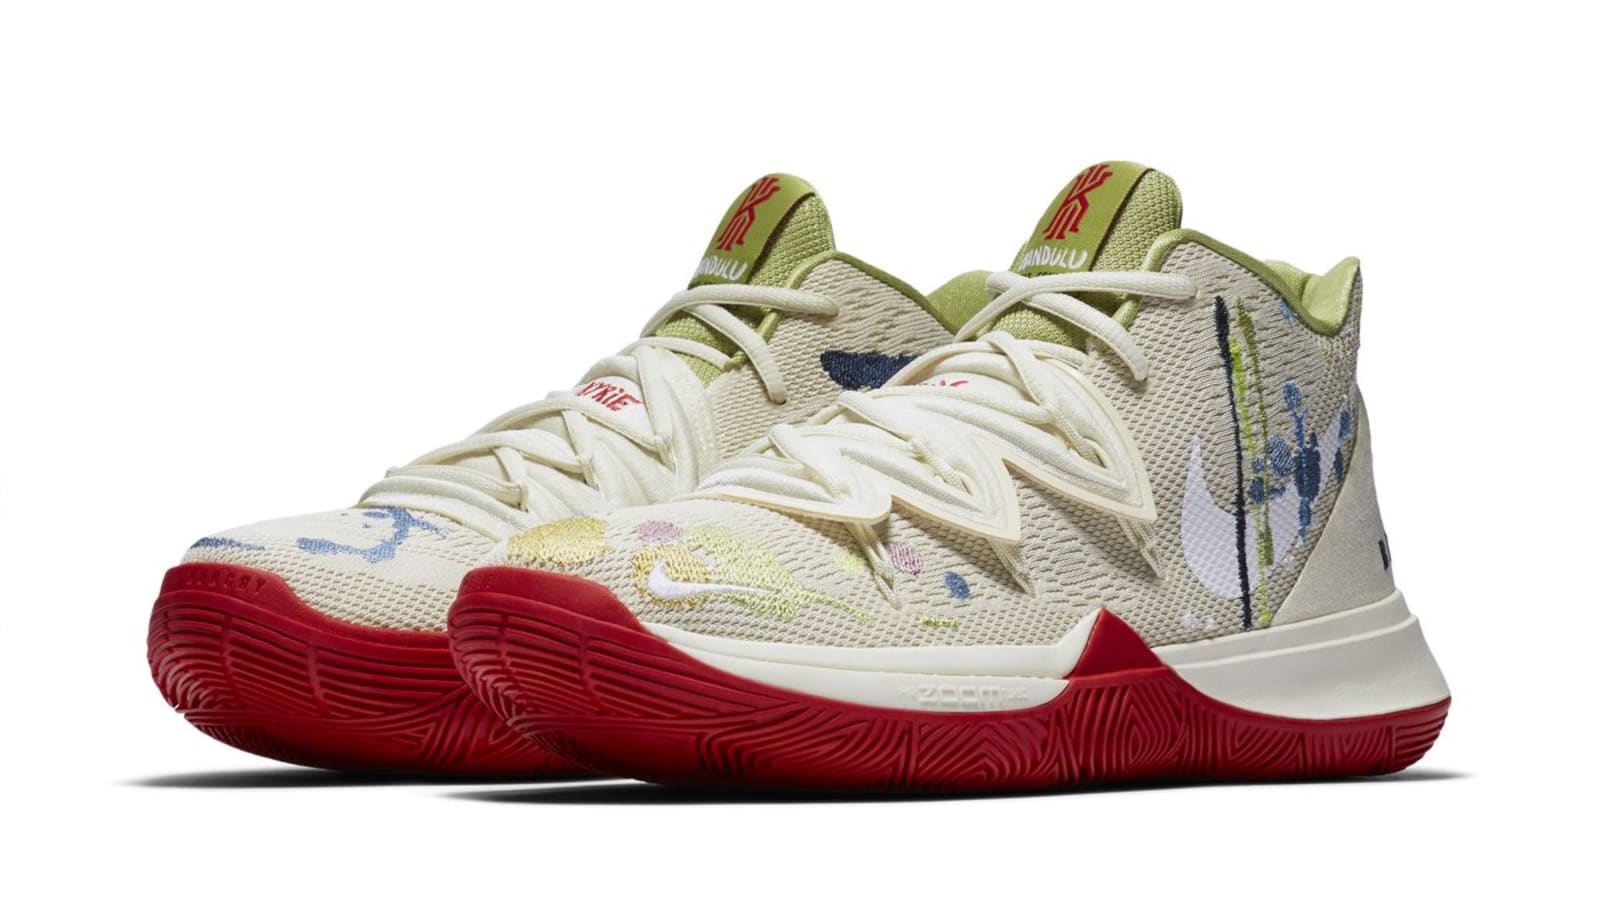 Bandulu X Nike Kyrie 5 Release Date Revealed: Official s